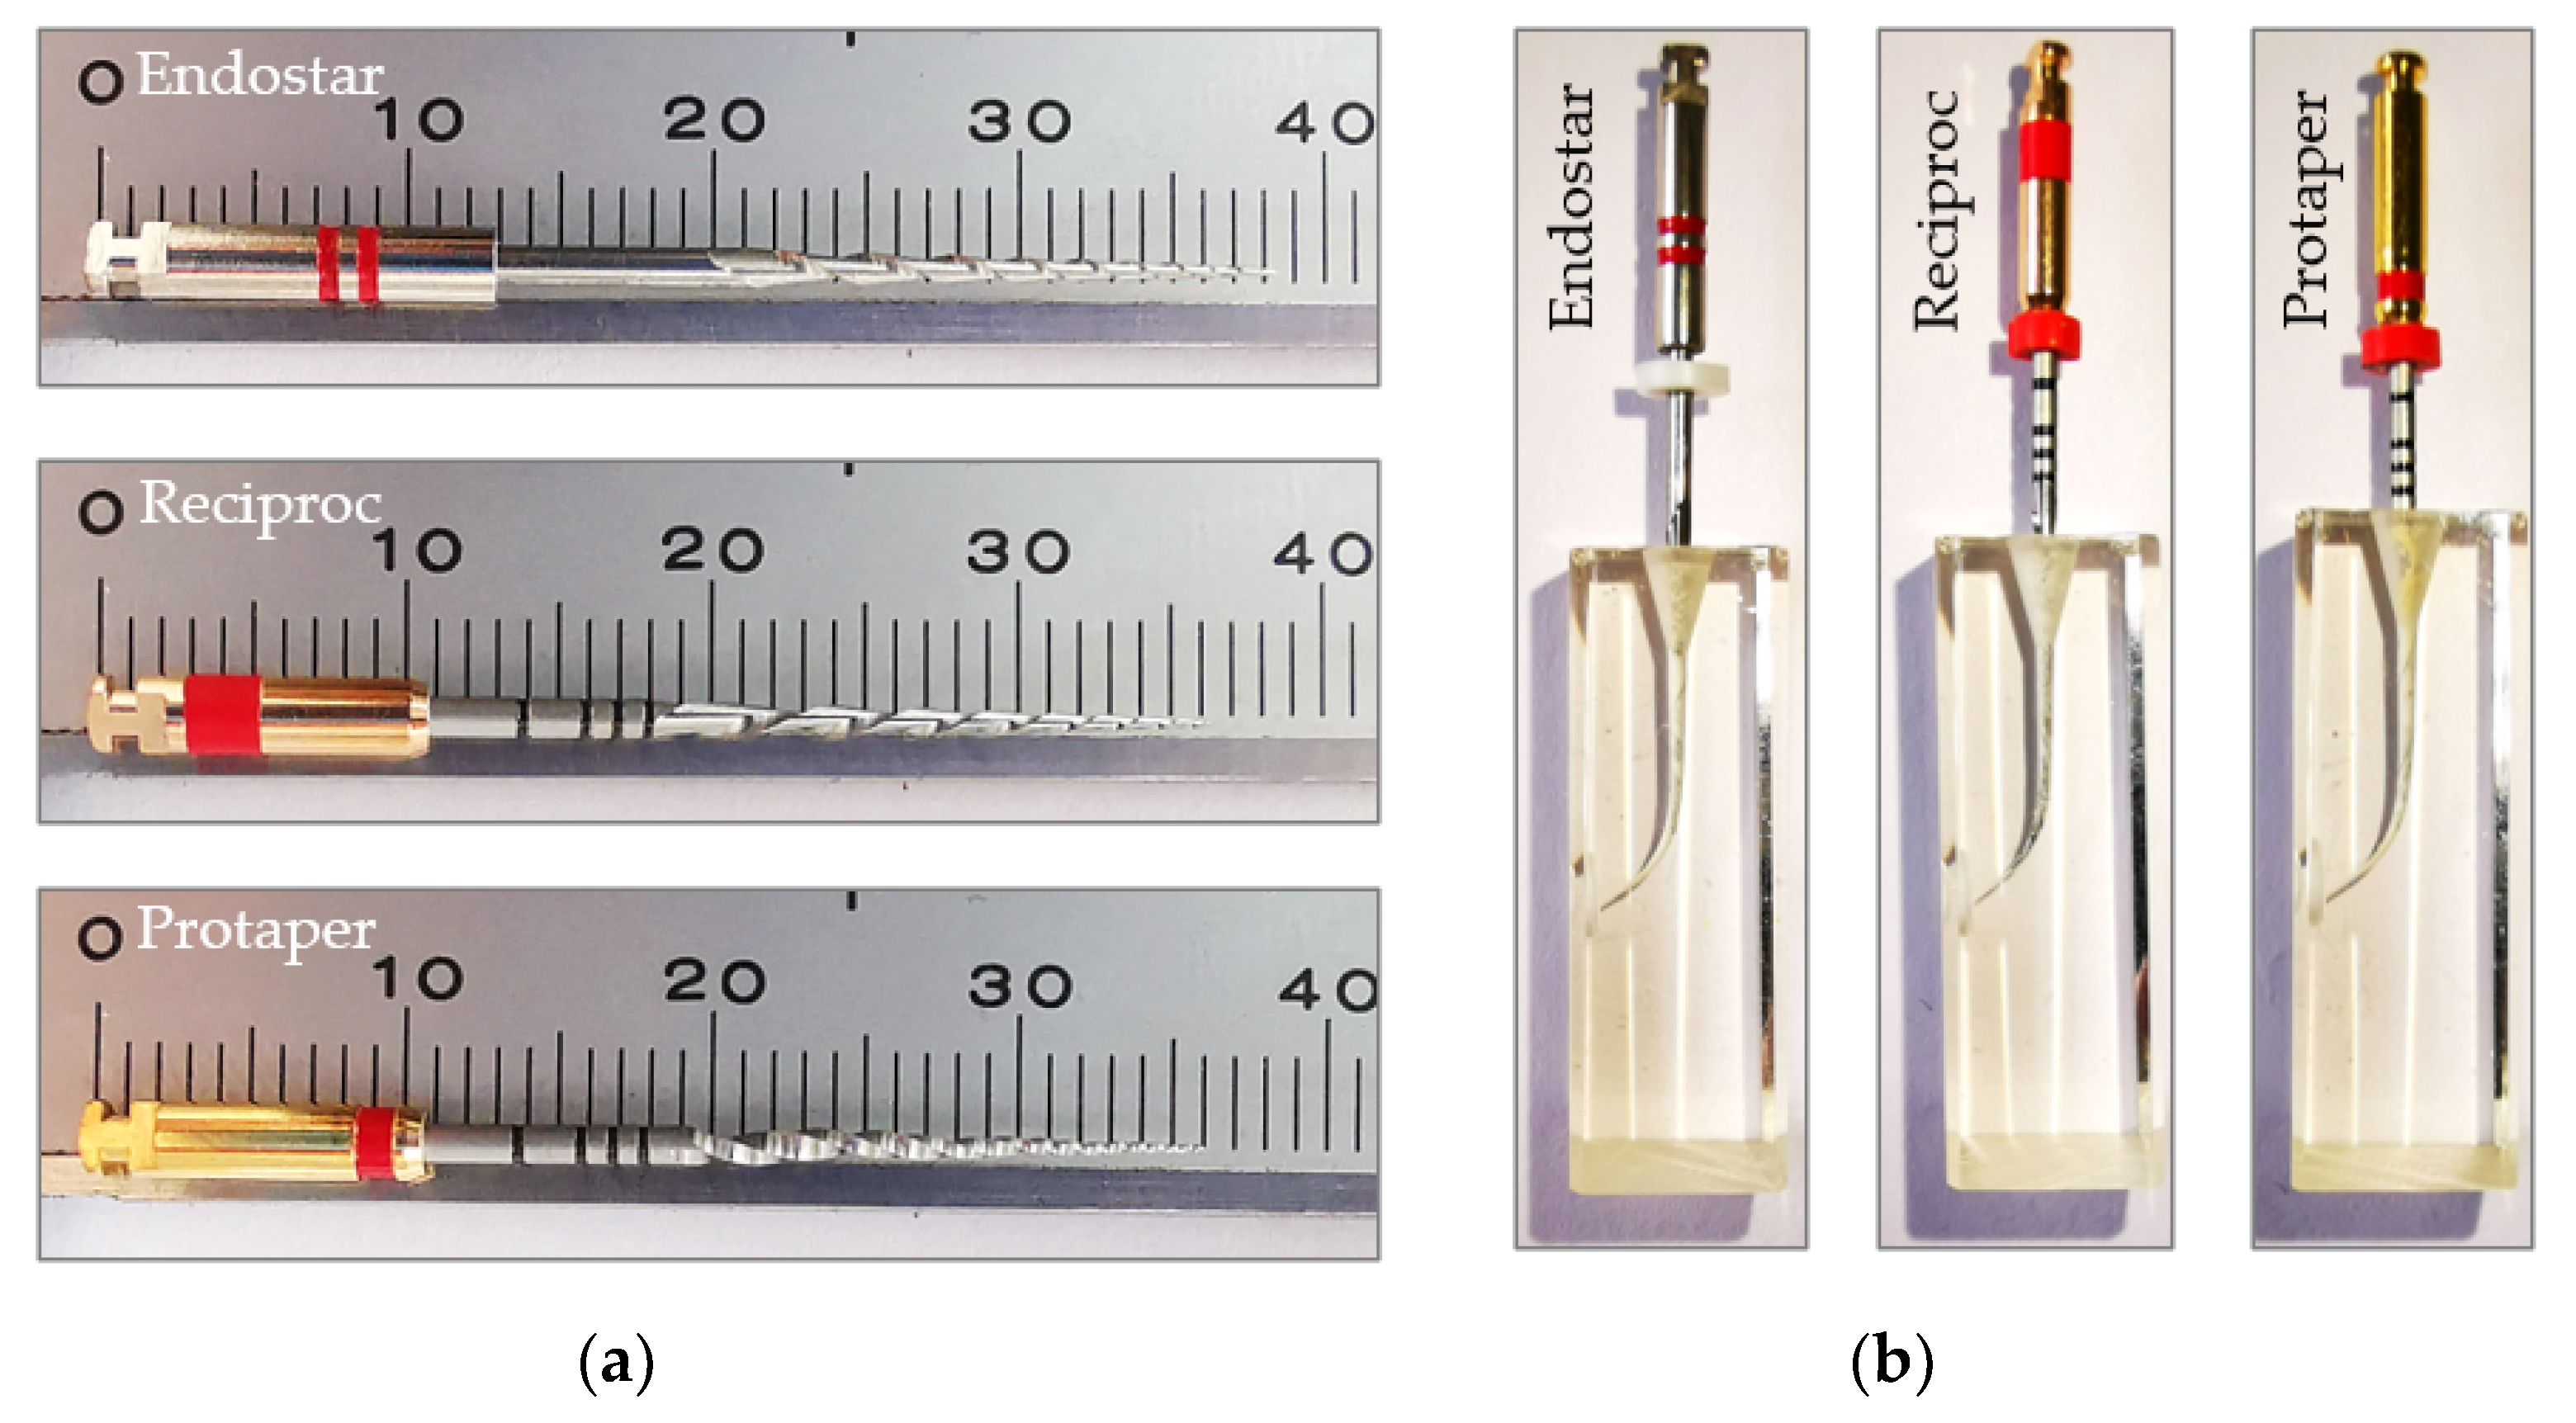 Applied Sciences | Free Full-Text | Experimental Study of the Effects of  Torsional Loading on Three Types of Nickel-Titanium Endodontic Instruments